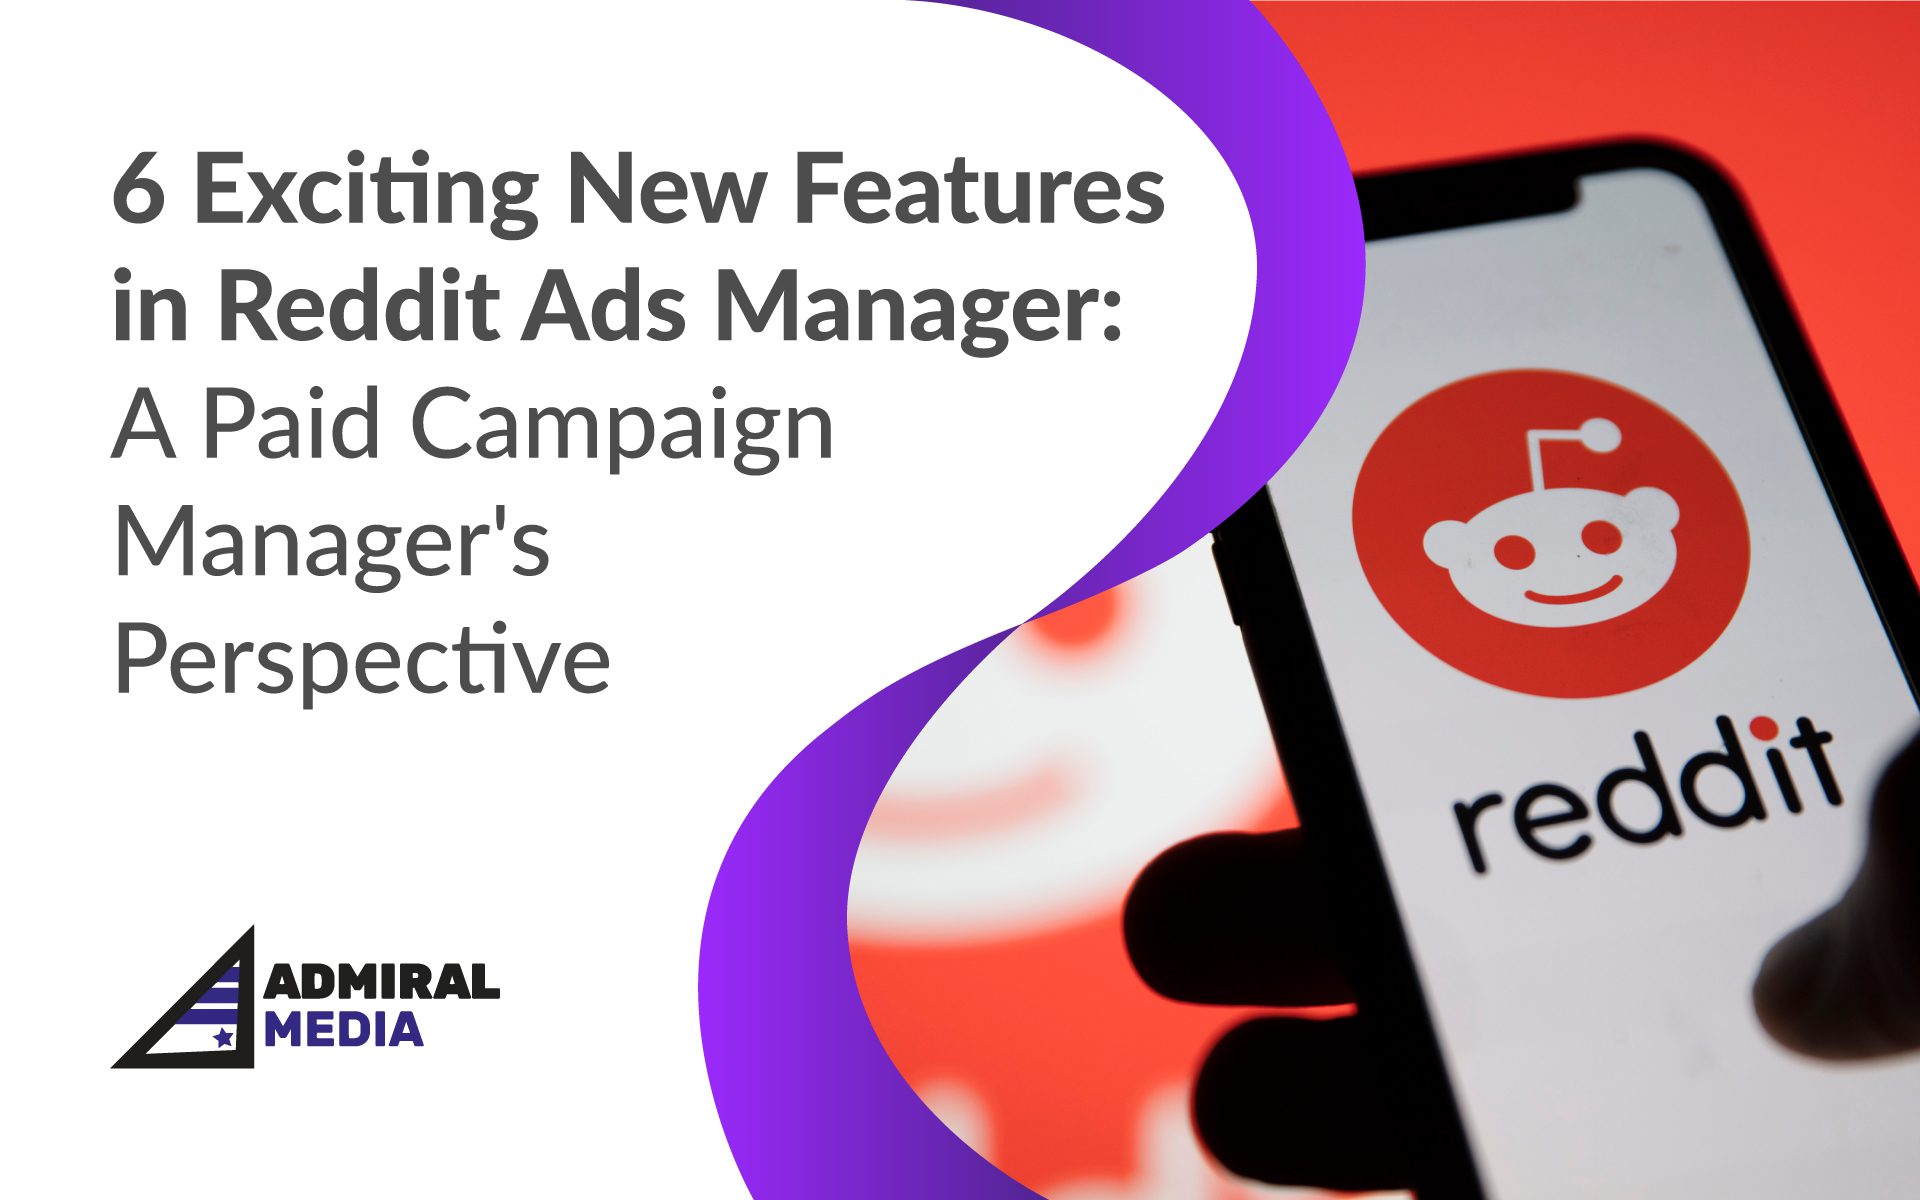 New Features in Reddit Ads Manager